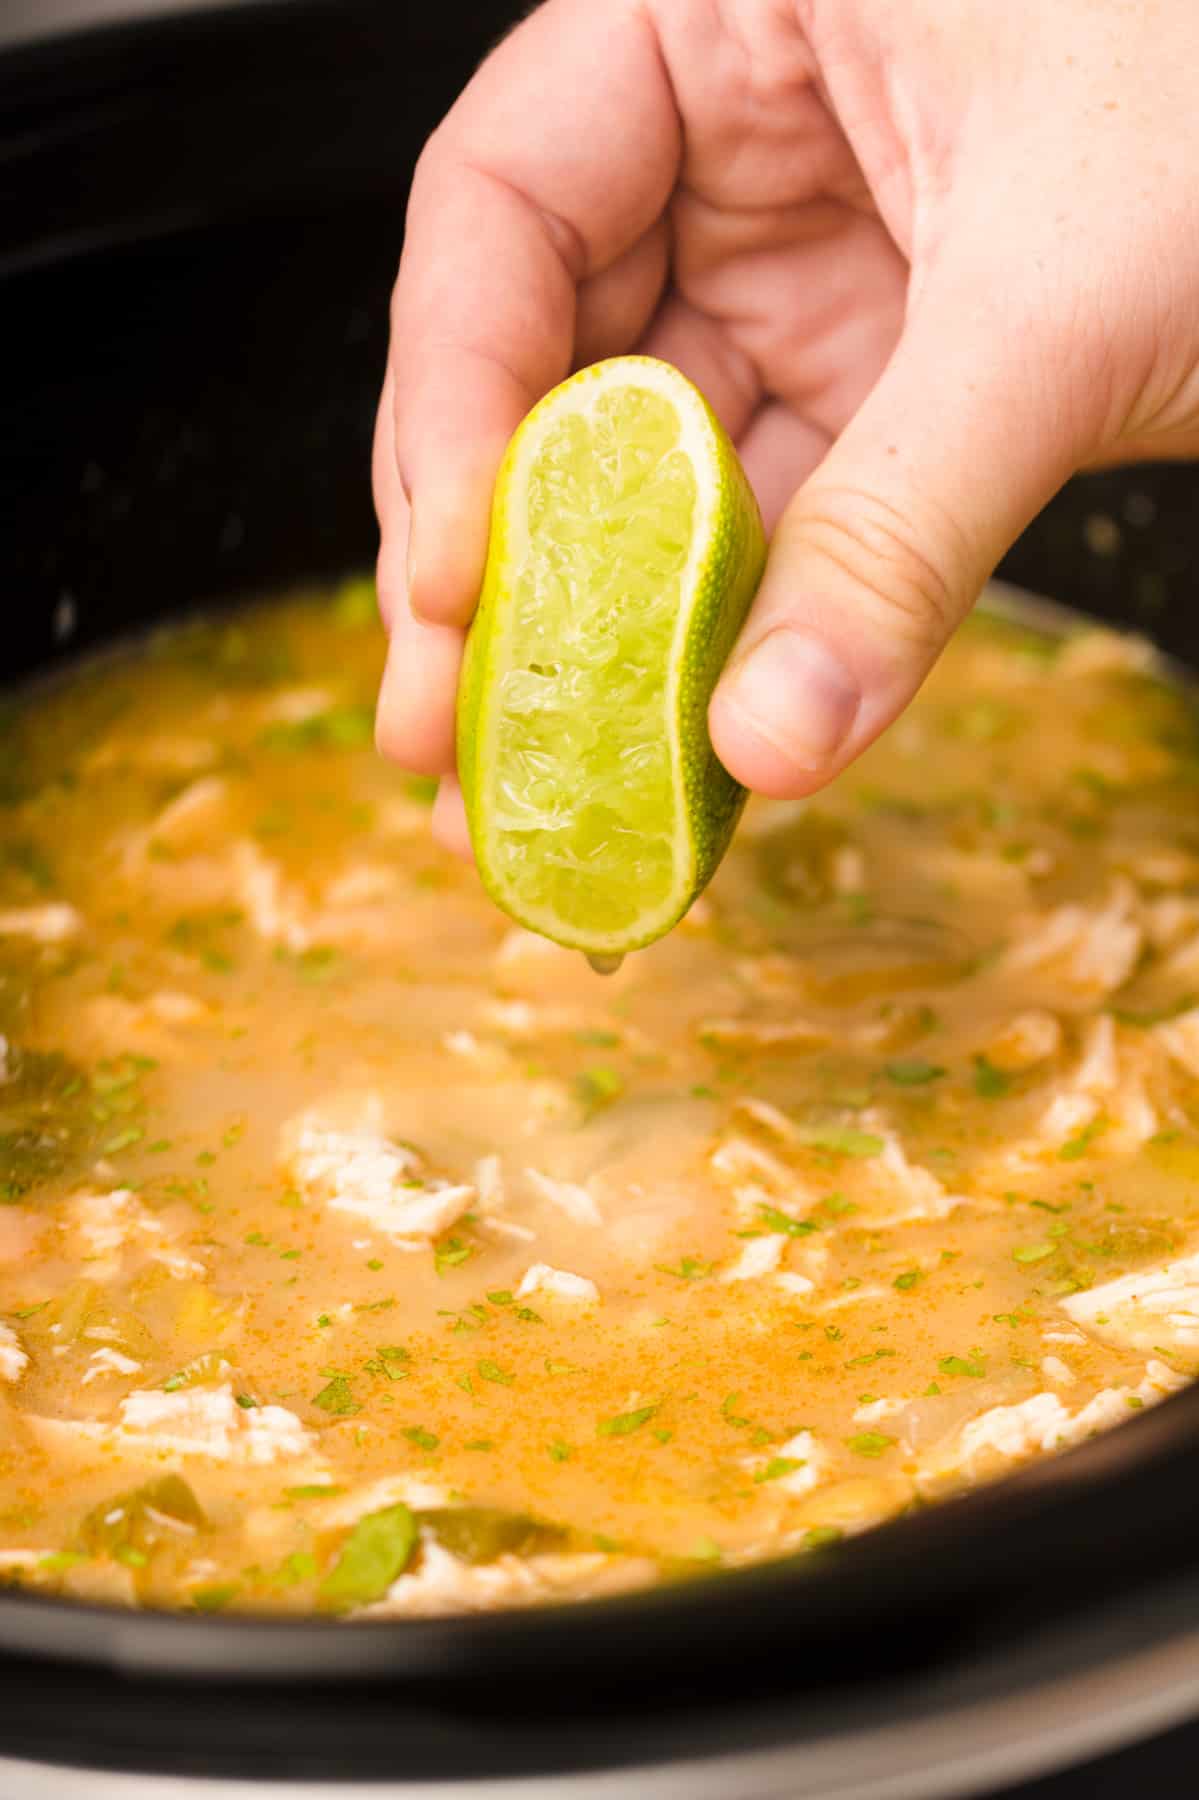 Hand squeezing a lime into chicken chili in a crockpot.